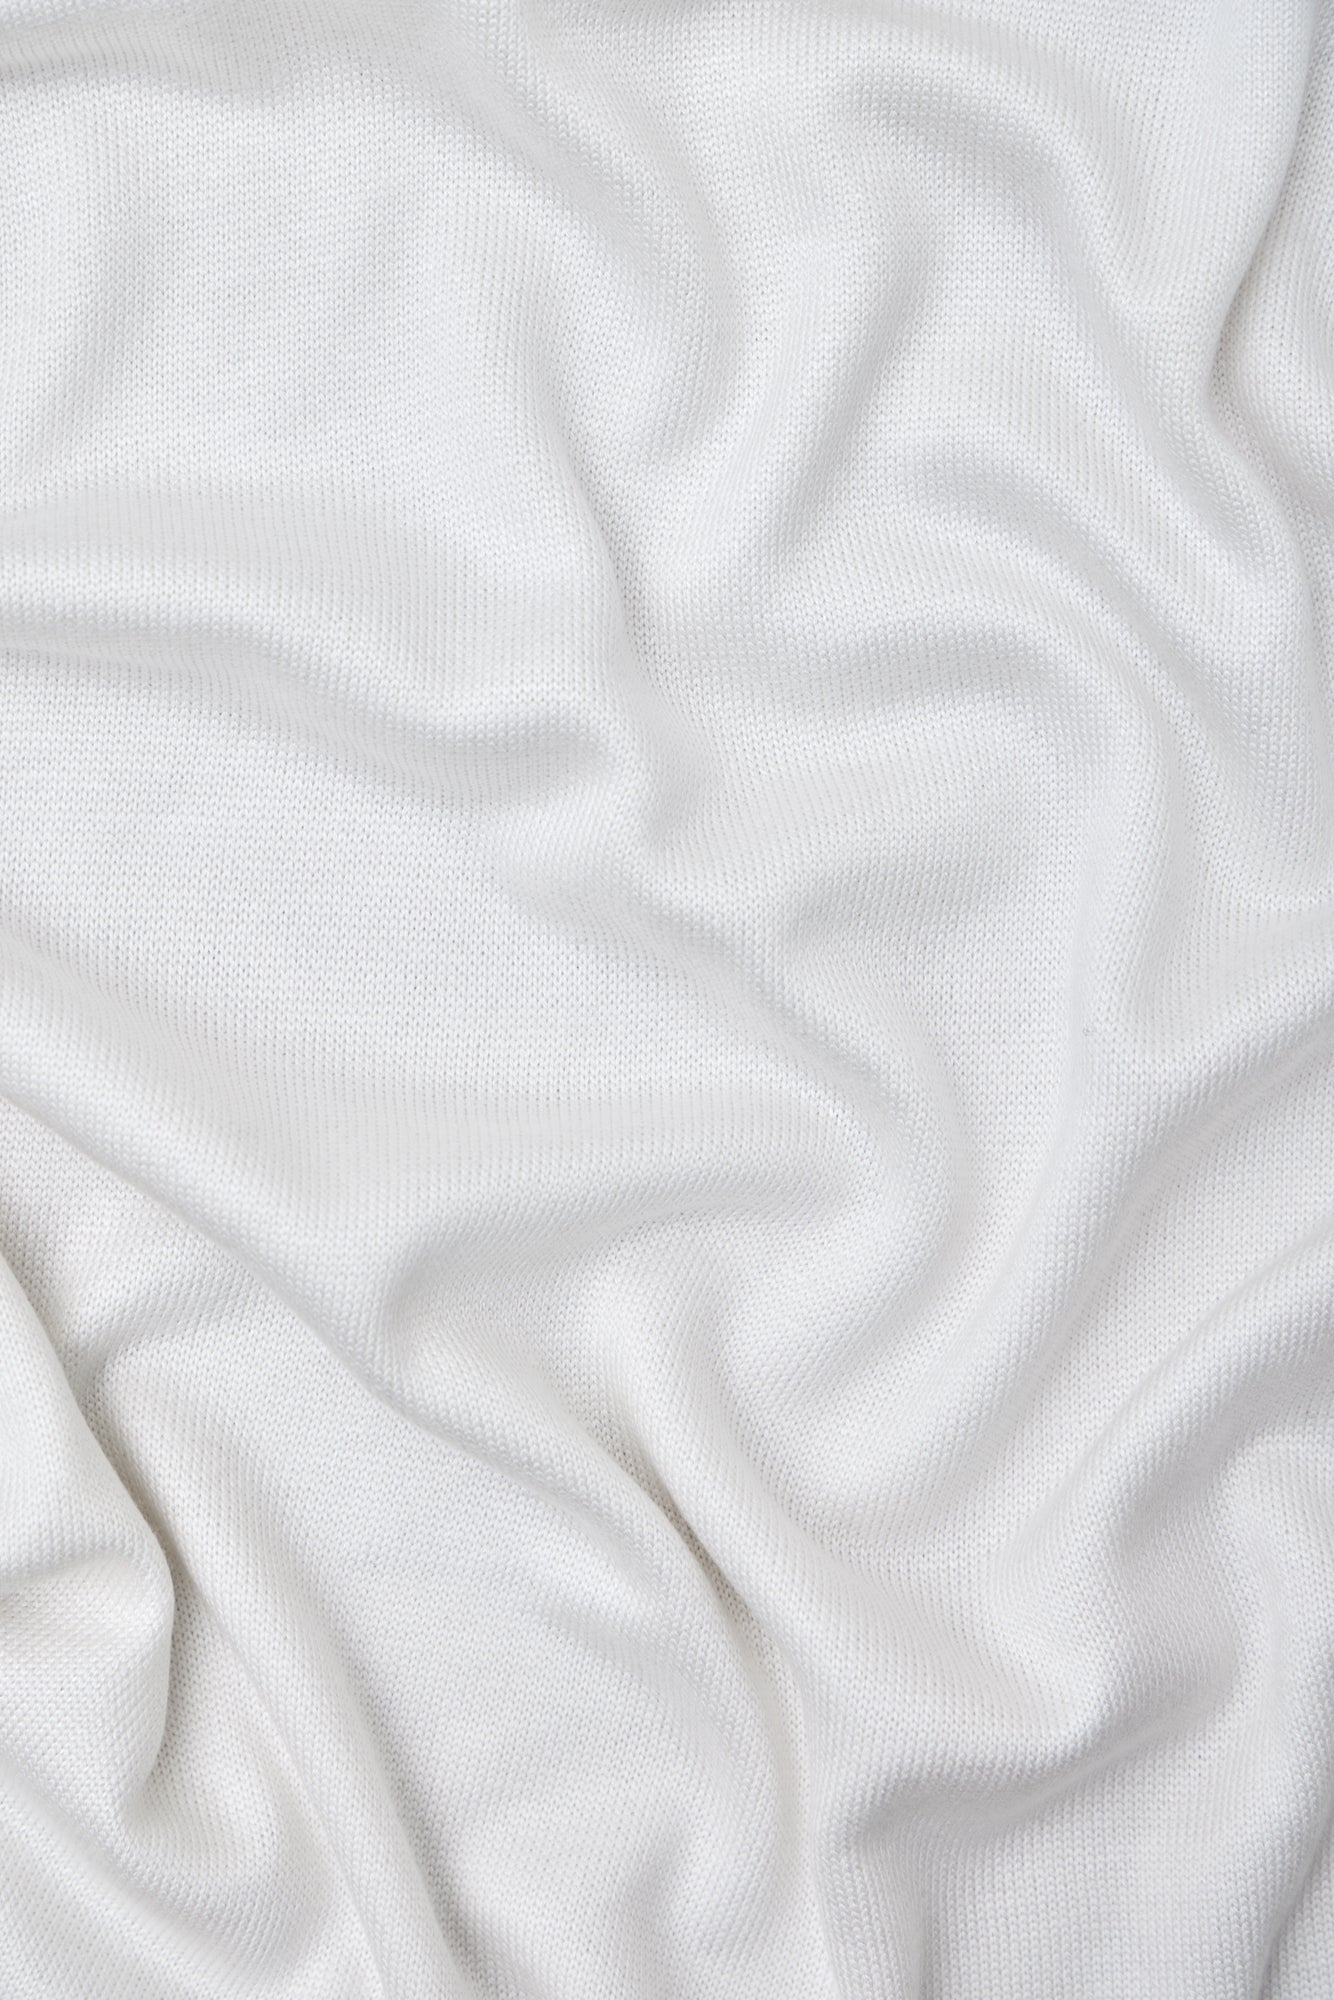 Close up of white Ecovero knit sewing fabric